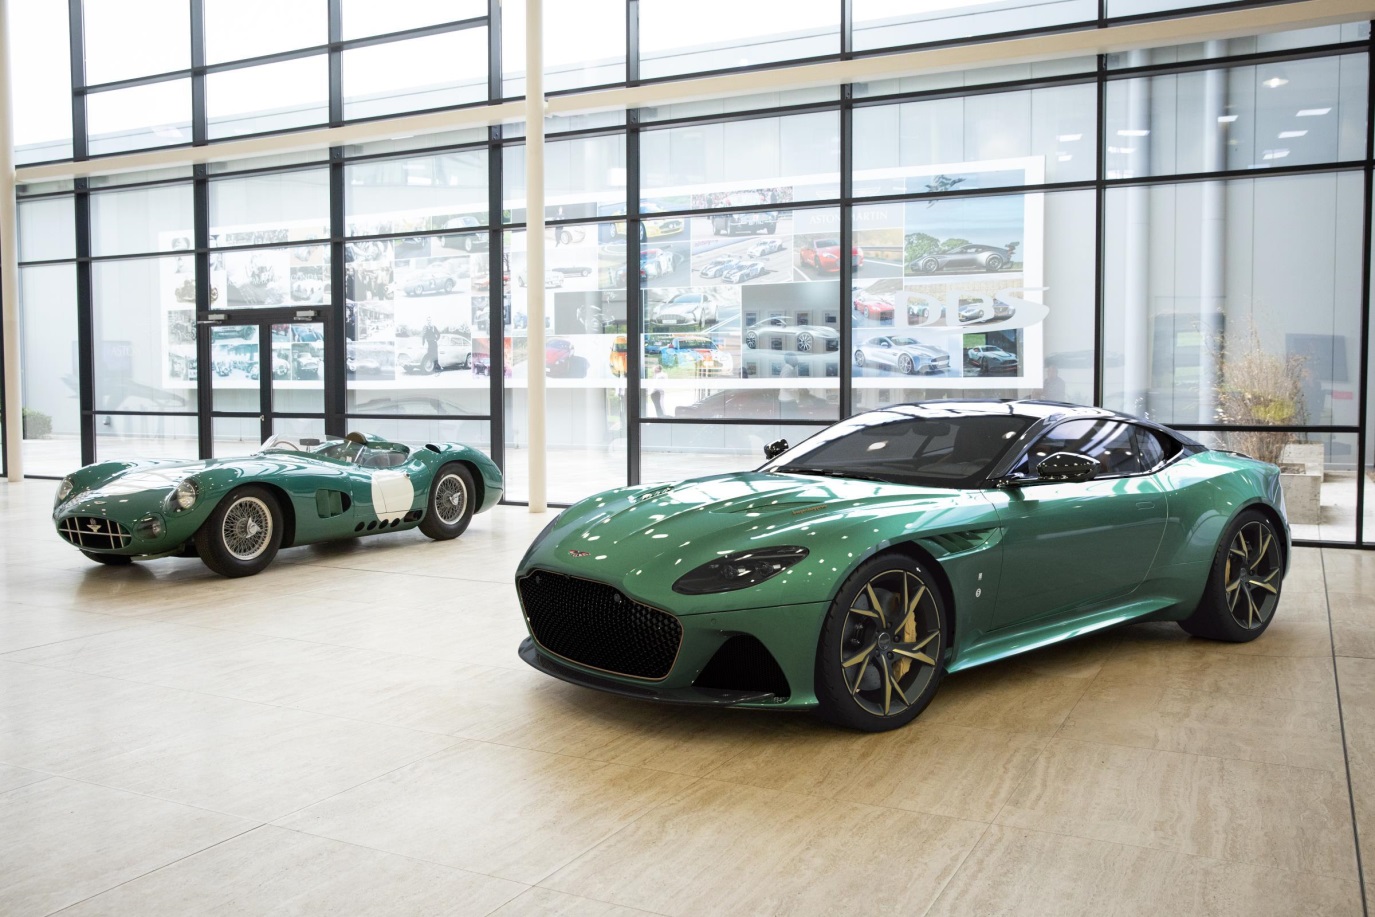 C:\Users\user\Desktop\新增資料夾\20181117\621-Car Guide\DBS-half\1541247908_Aston-Martin-pays-tribute-to-DBR1-with-new-DBS-59-special-edition.jpg